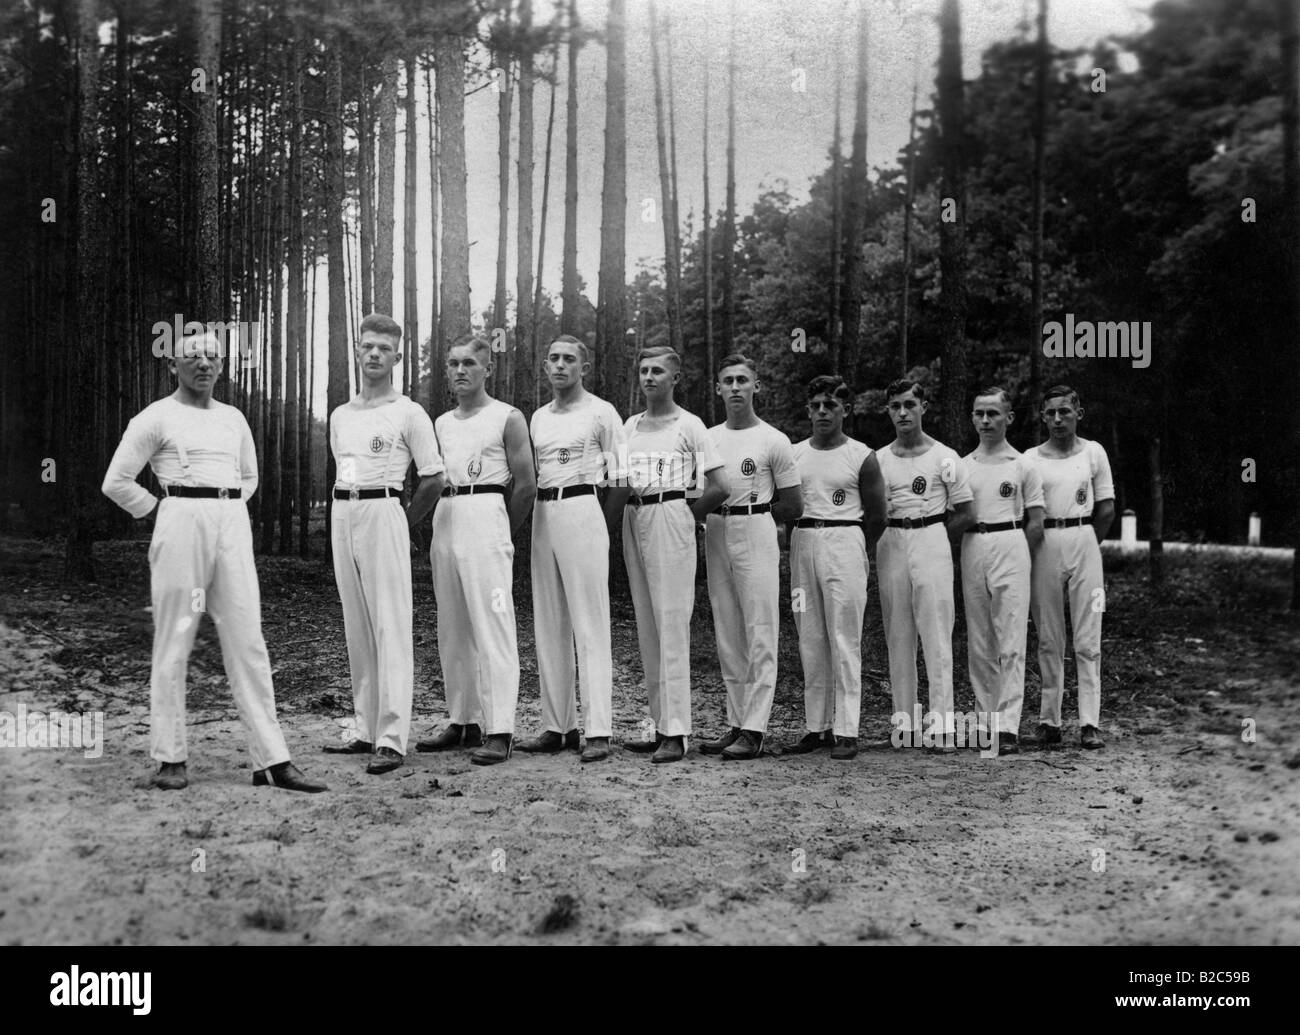 Athletes standing in a row in a forest, historic picture from about 1920 Stock Photo